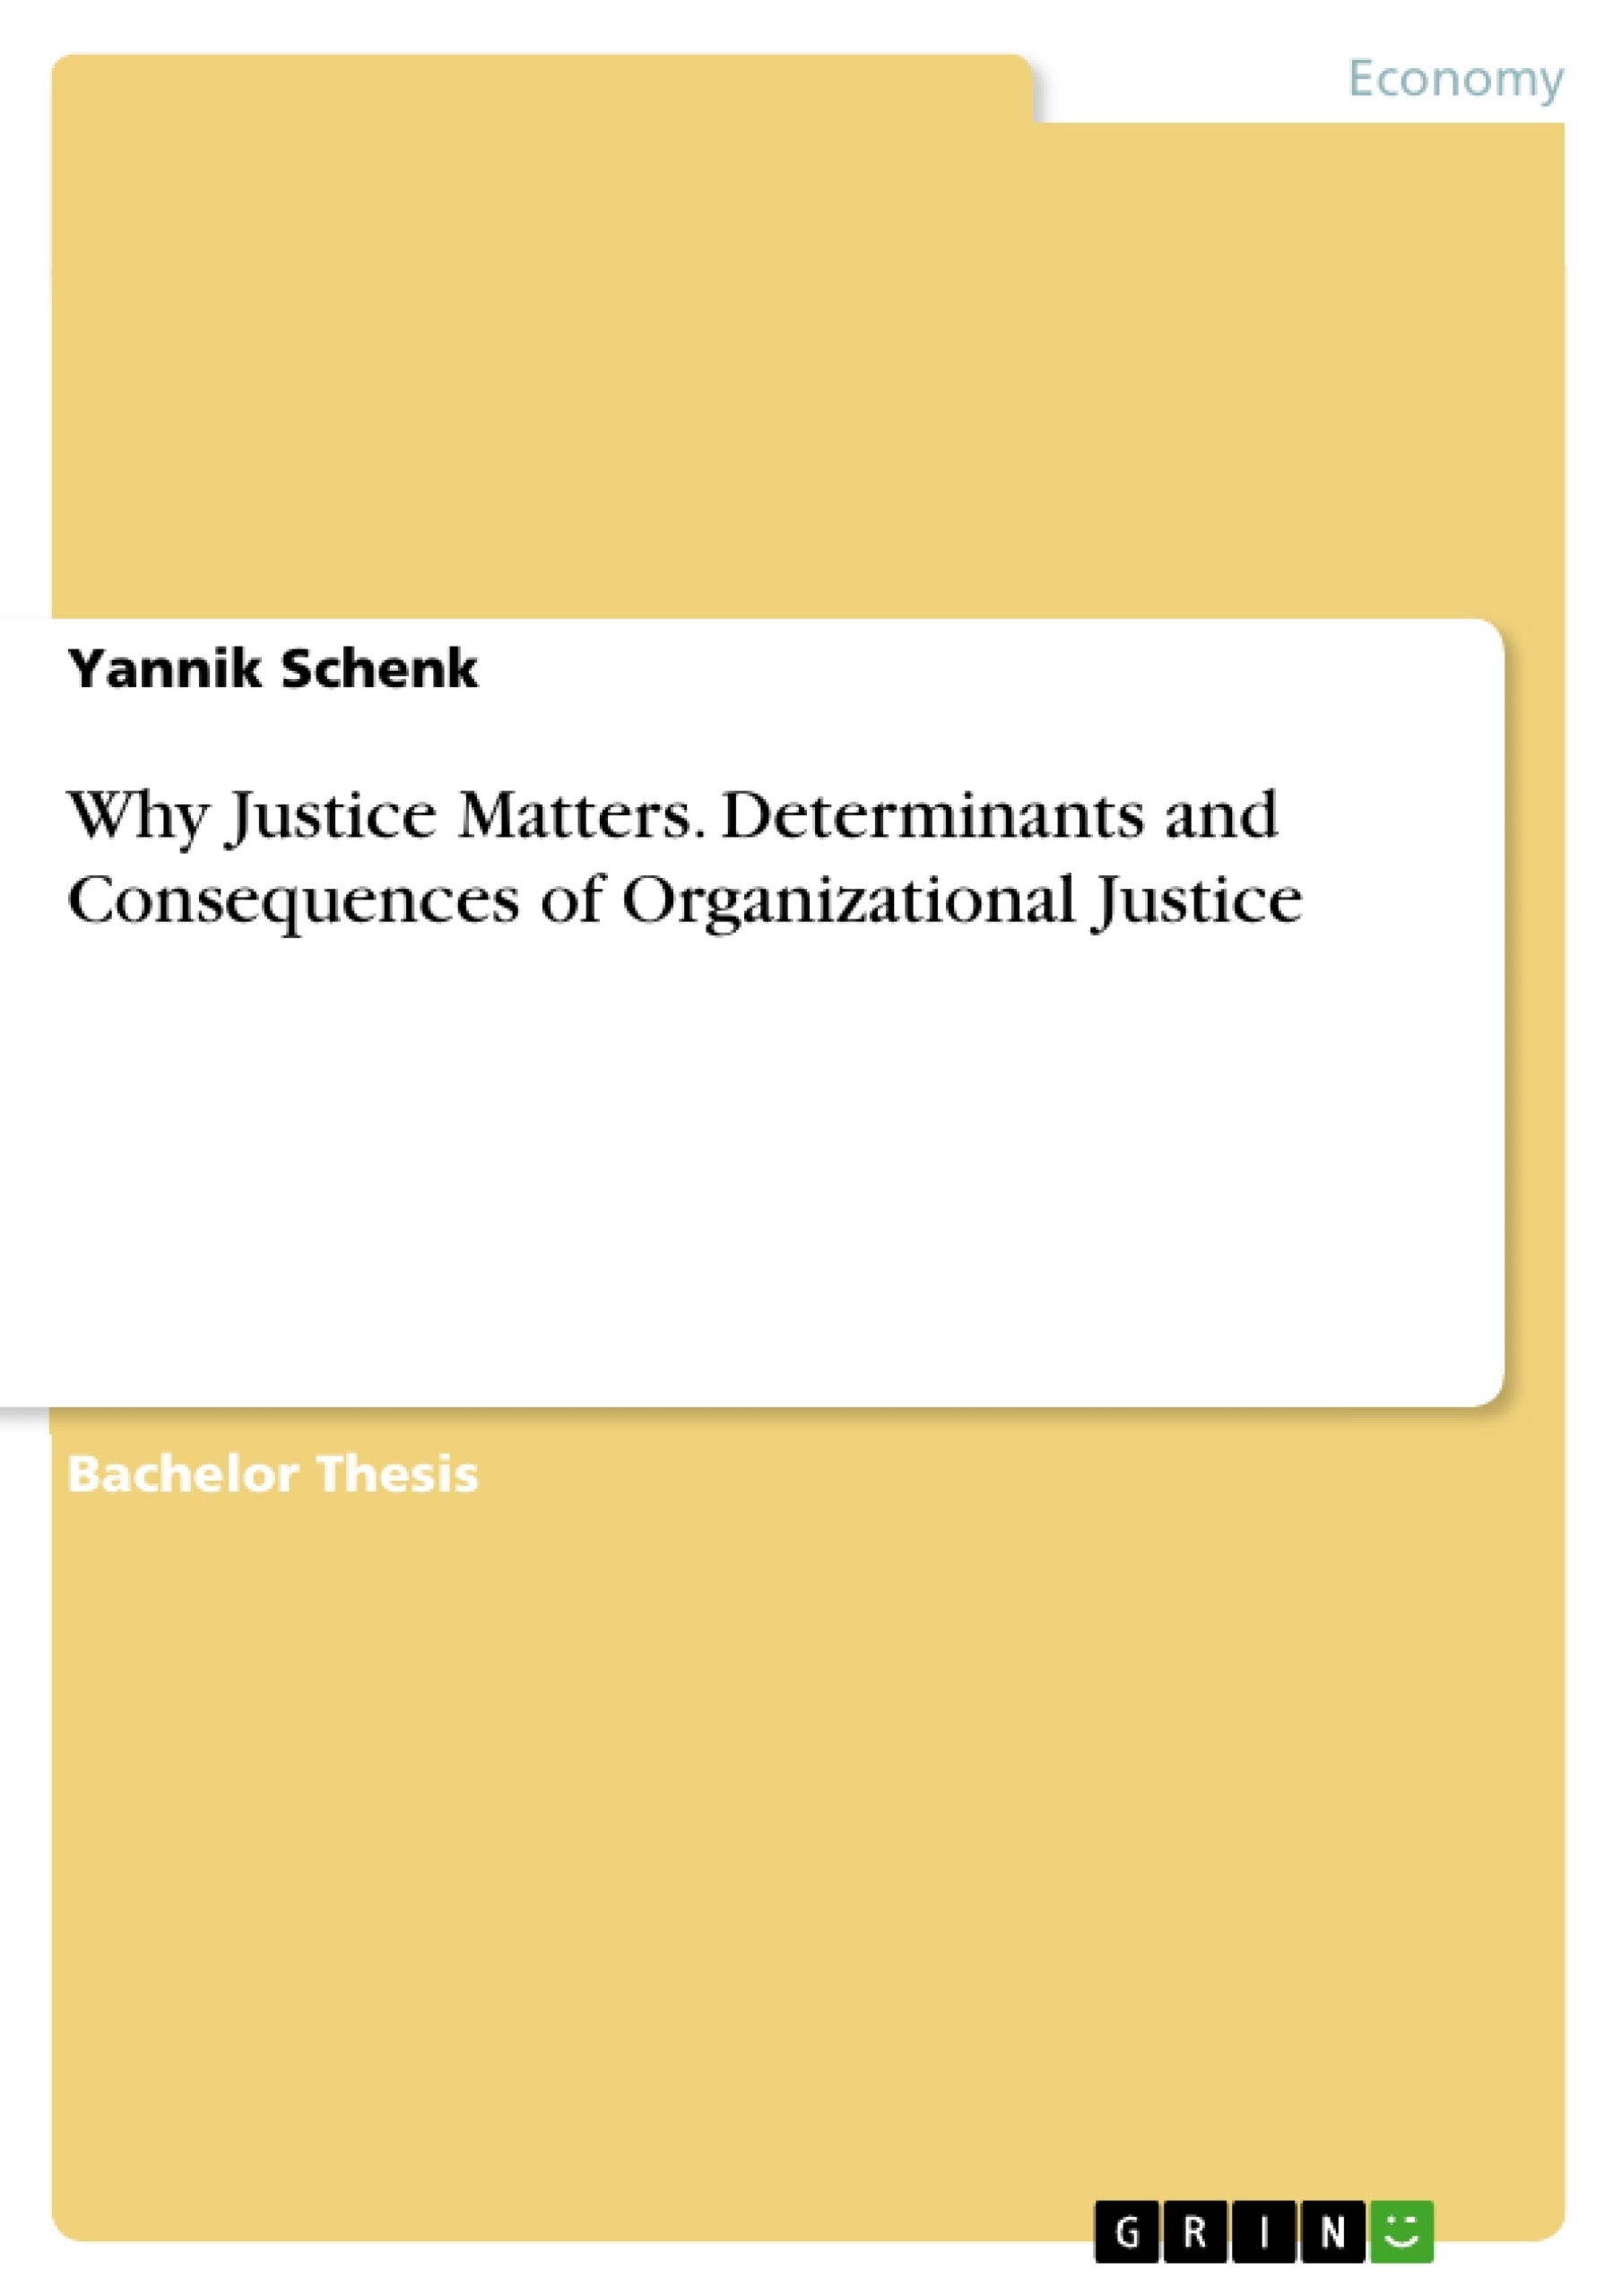 Title: Why Justice Matters. Determinants and Consequences of Organizational Justice